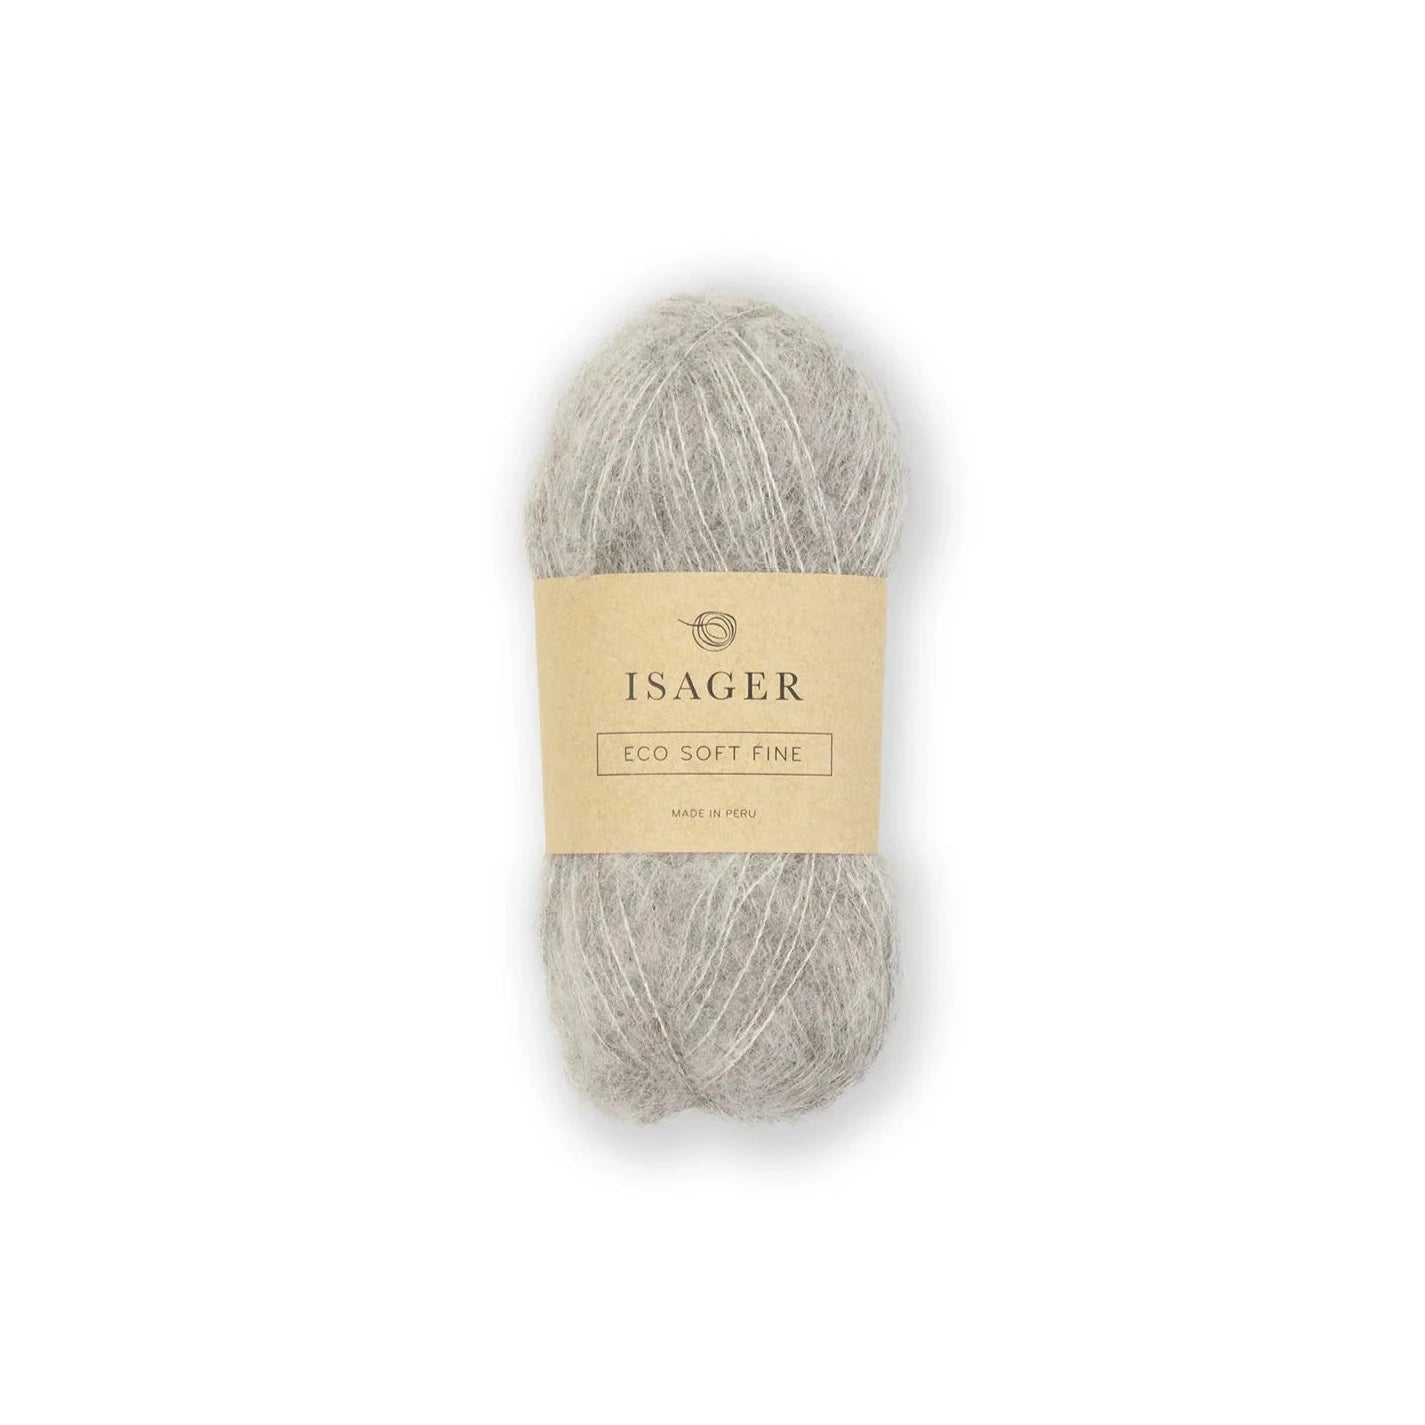 Isager Soft Fine - Isager - E2s - The Little Yarn Store